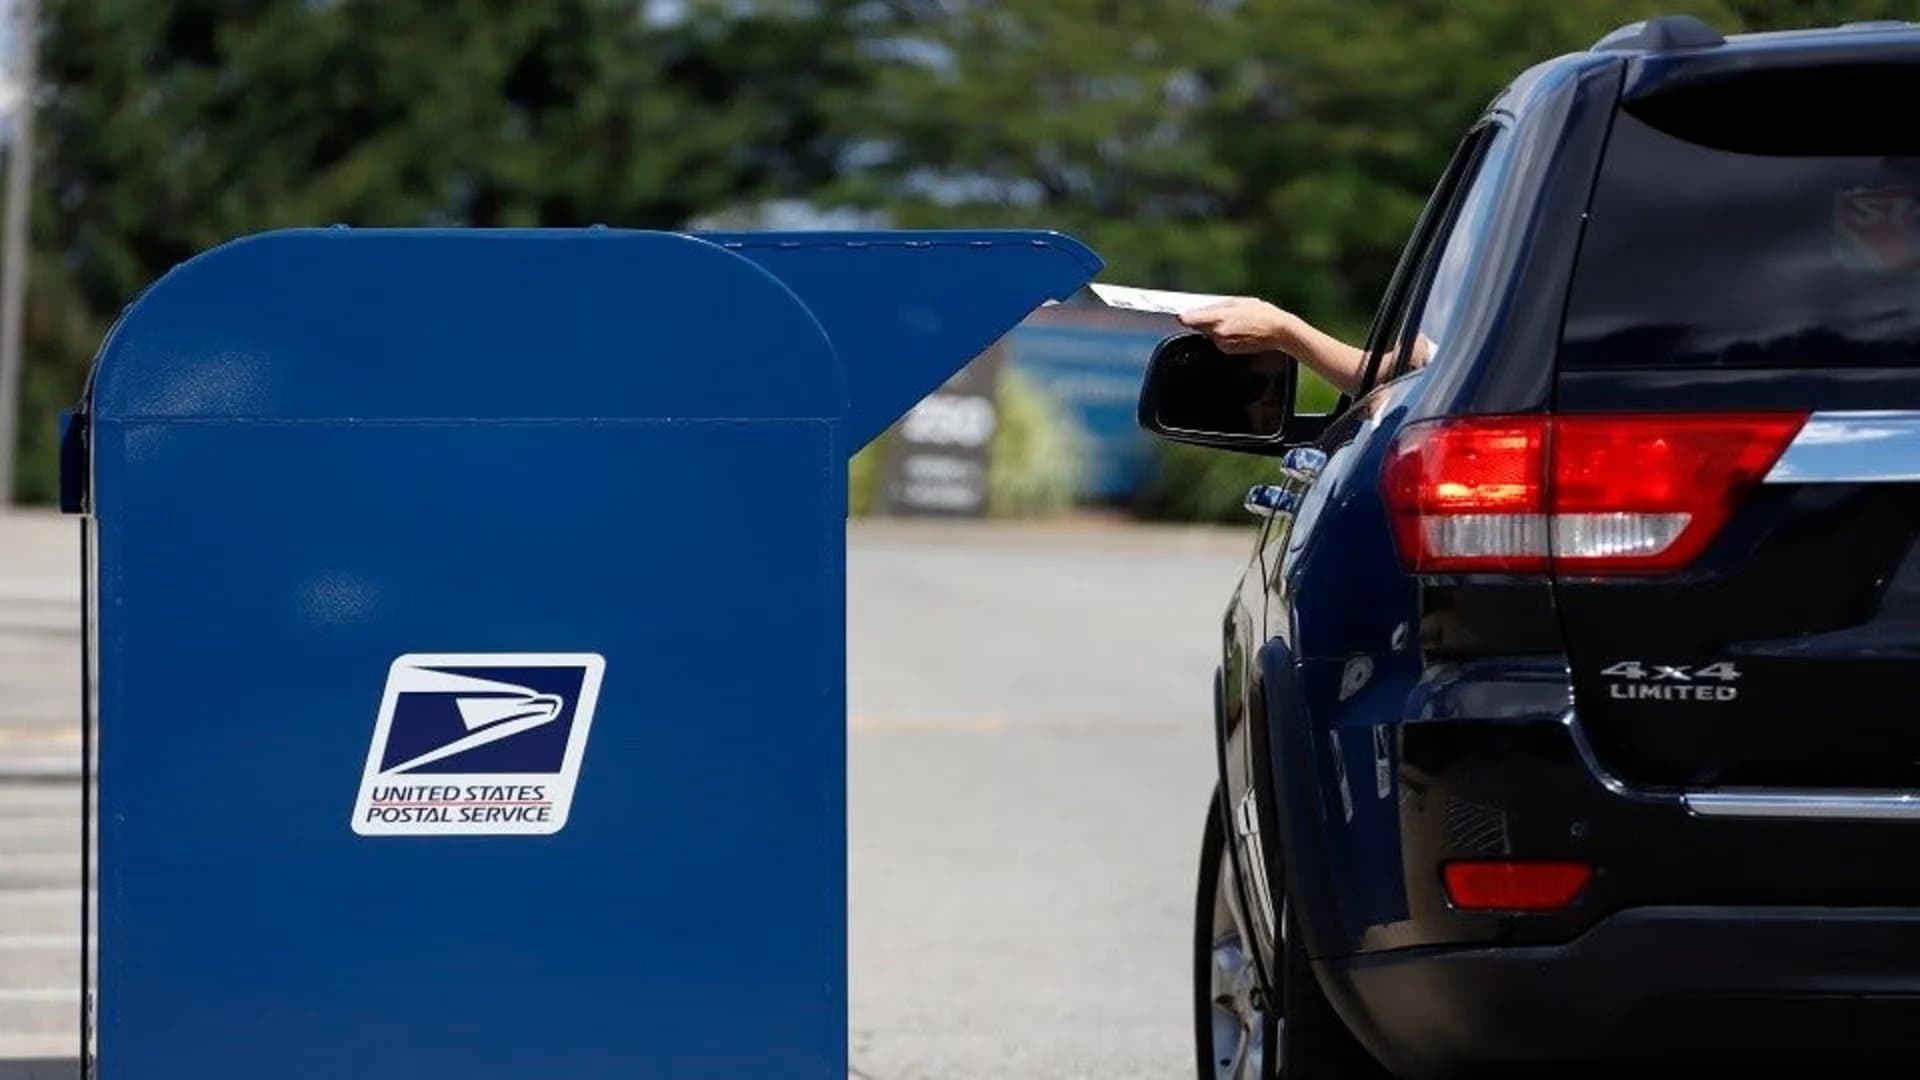 House passes bill to reverse changes blamed for mail delays